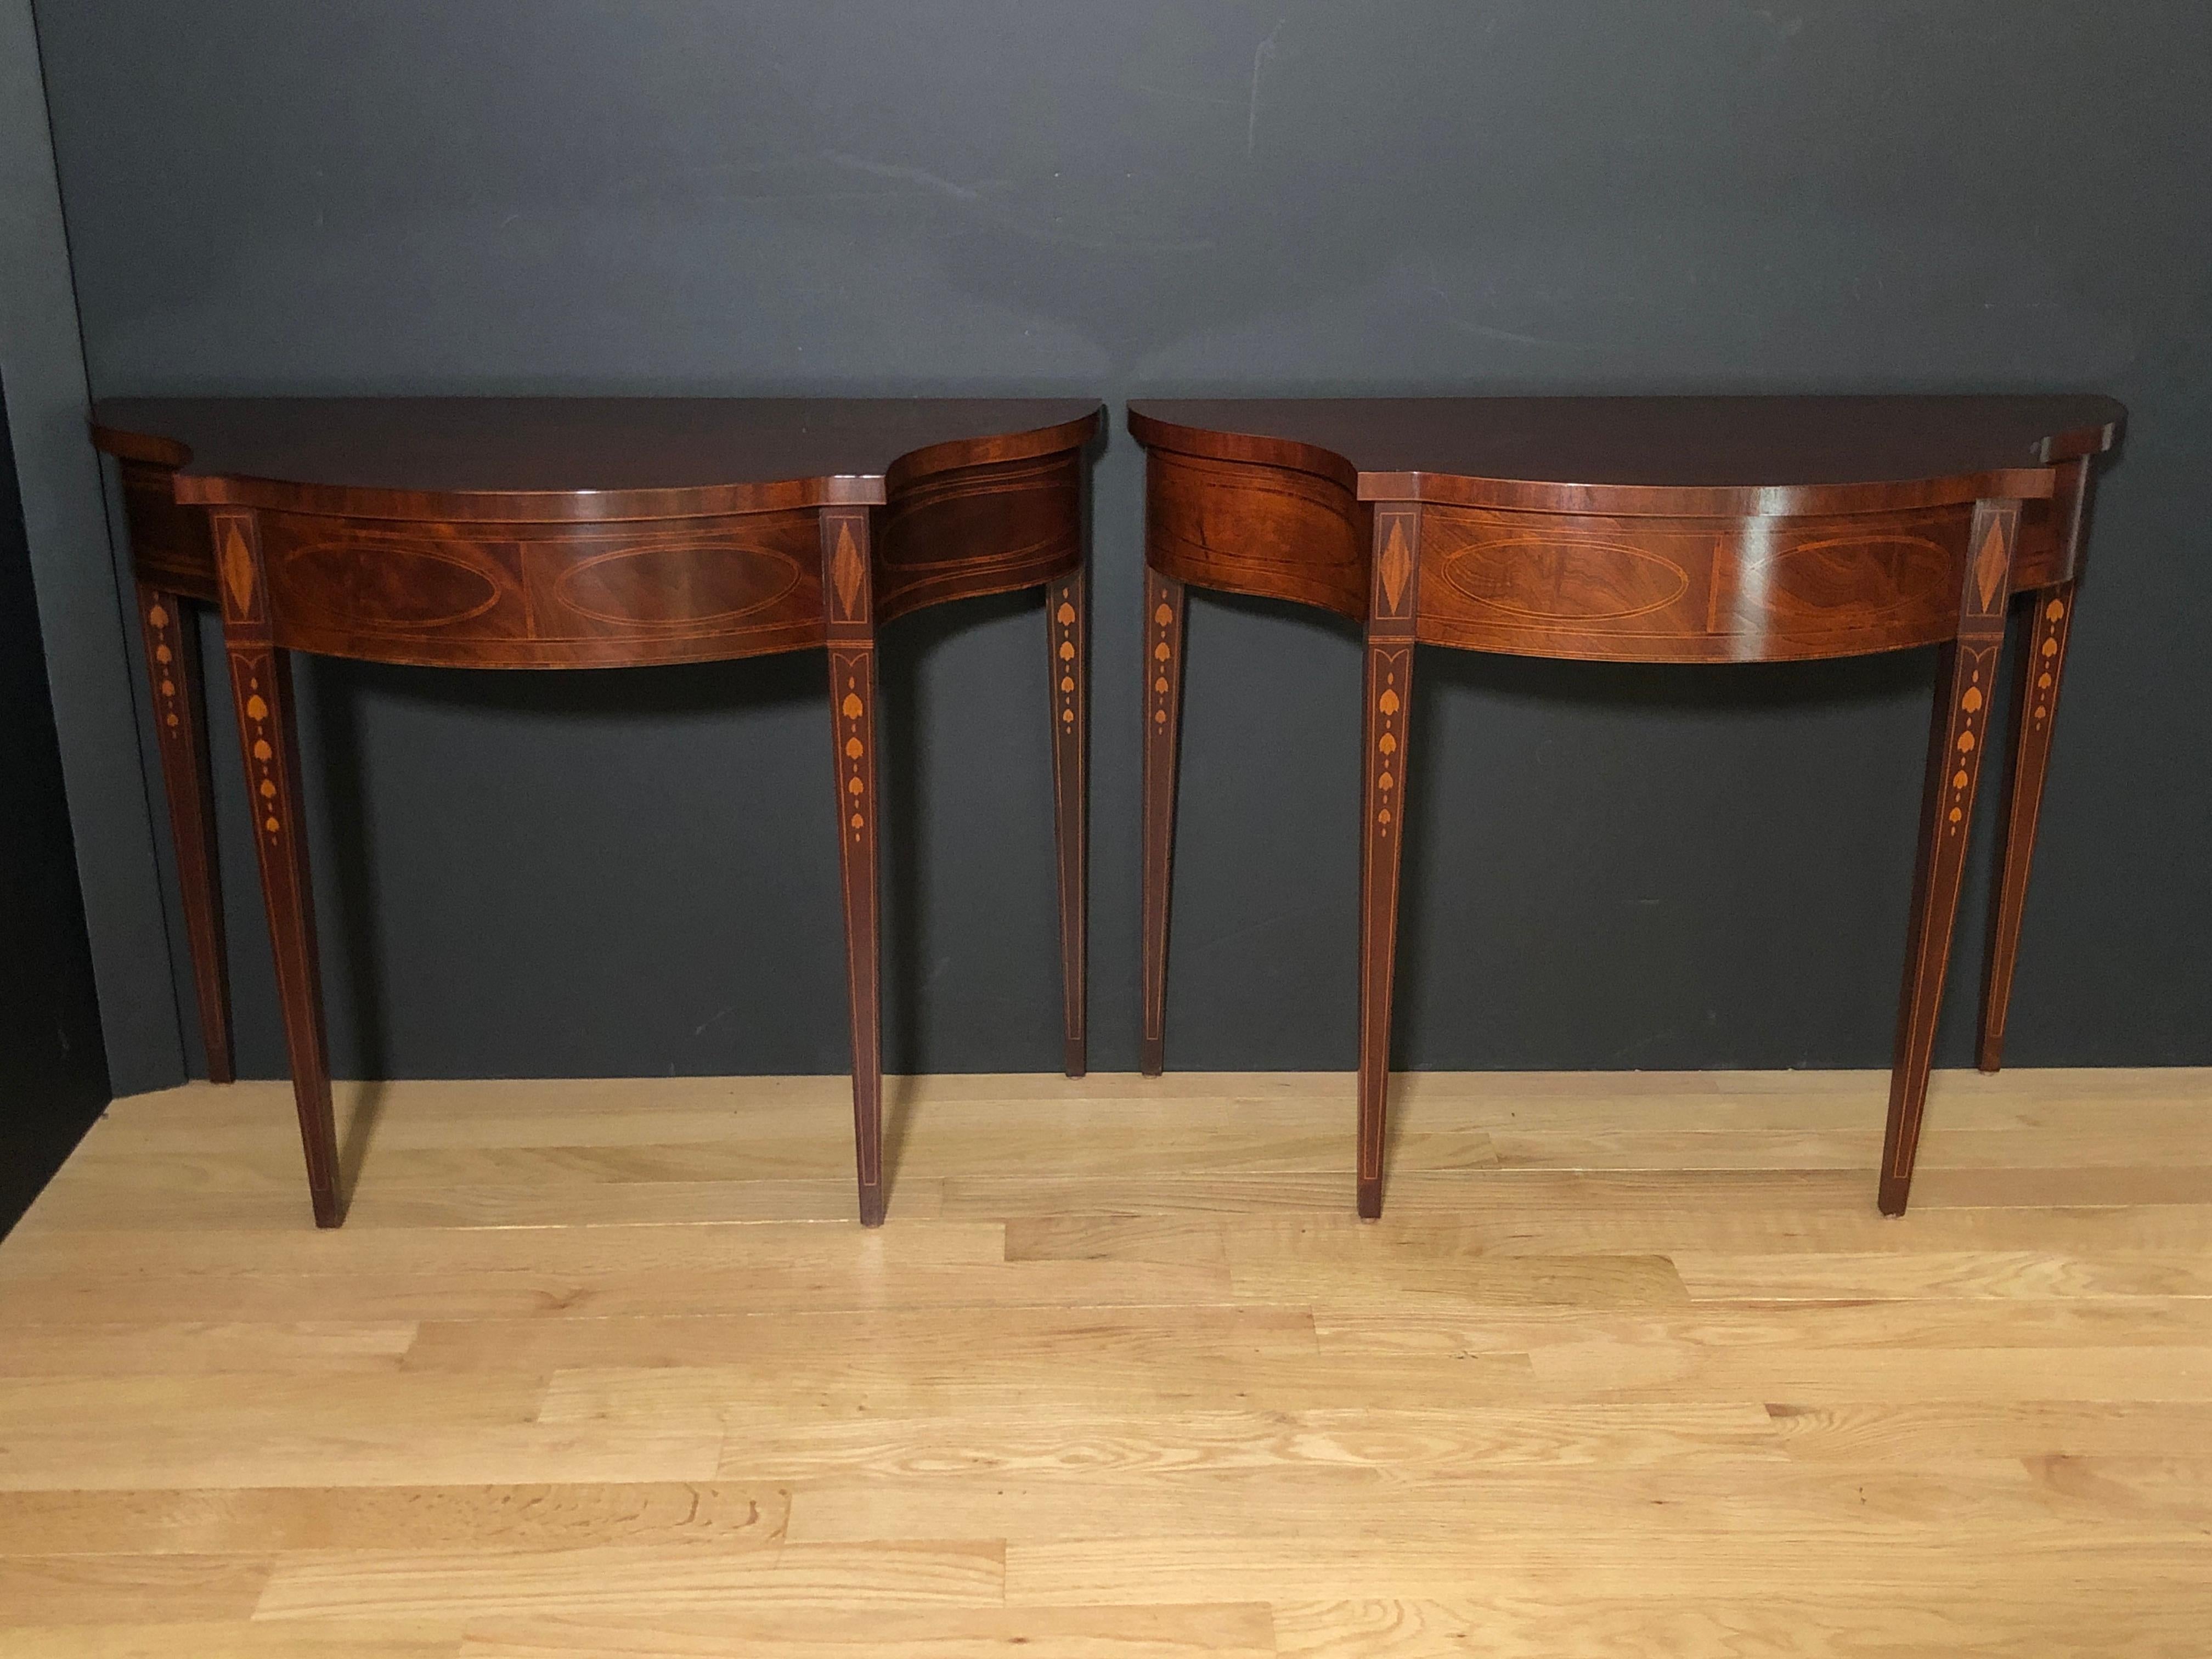 Hepplewhite Pair of Historic Charleston Demilune Console Tables by Baker